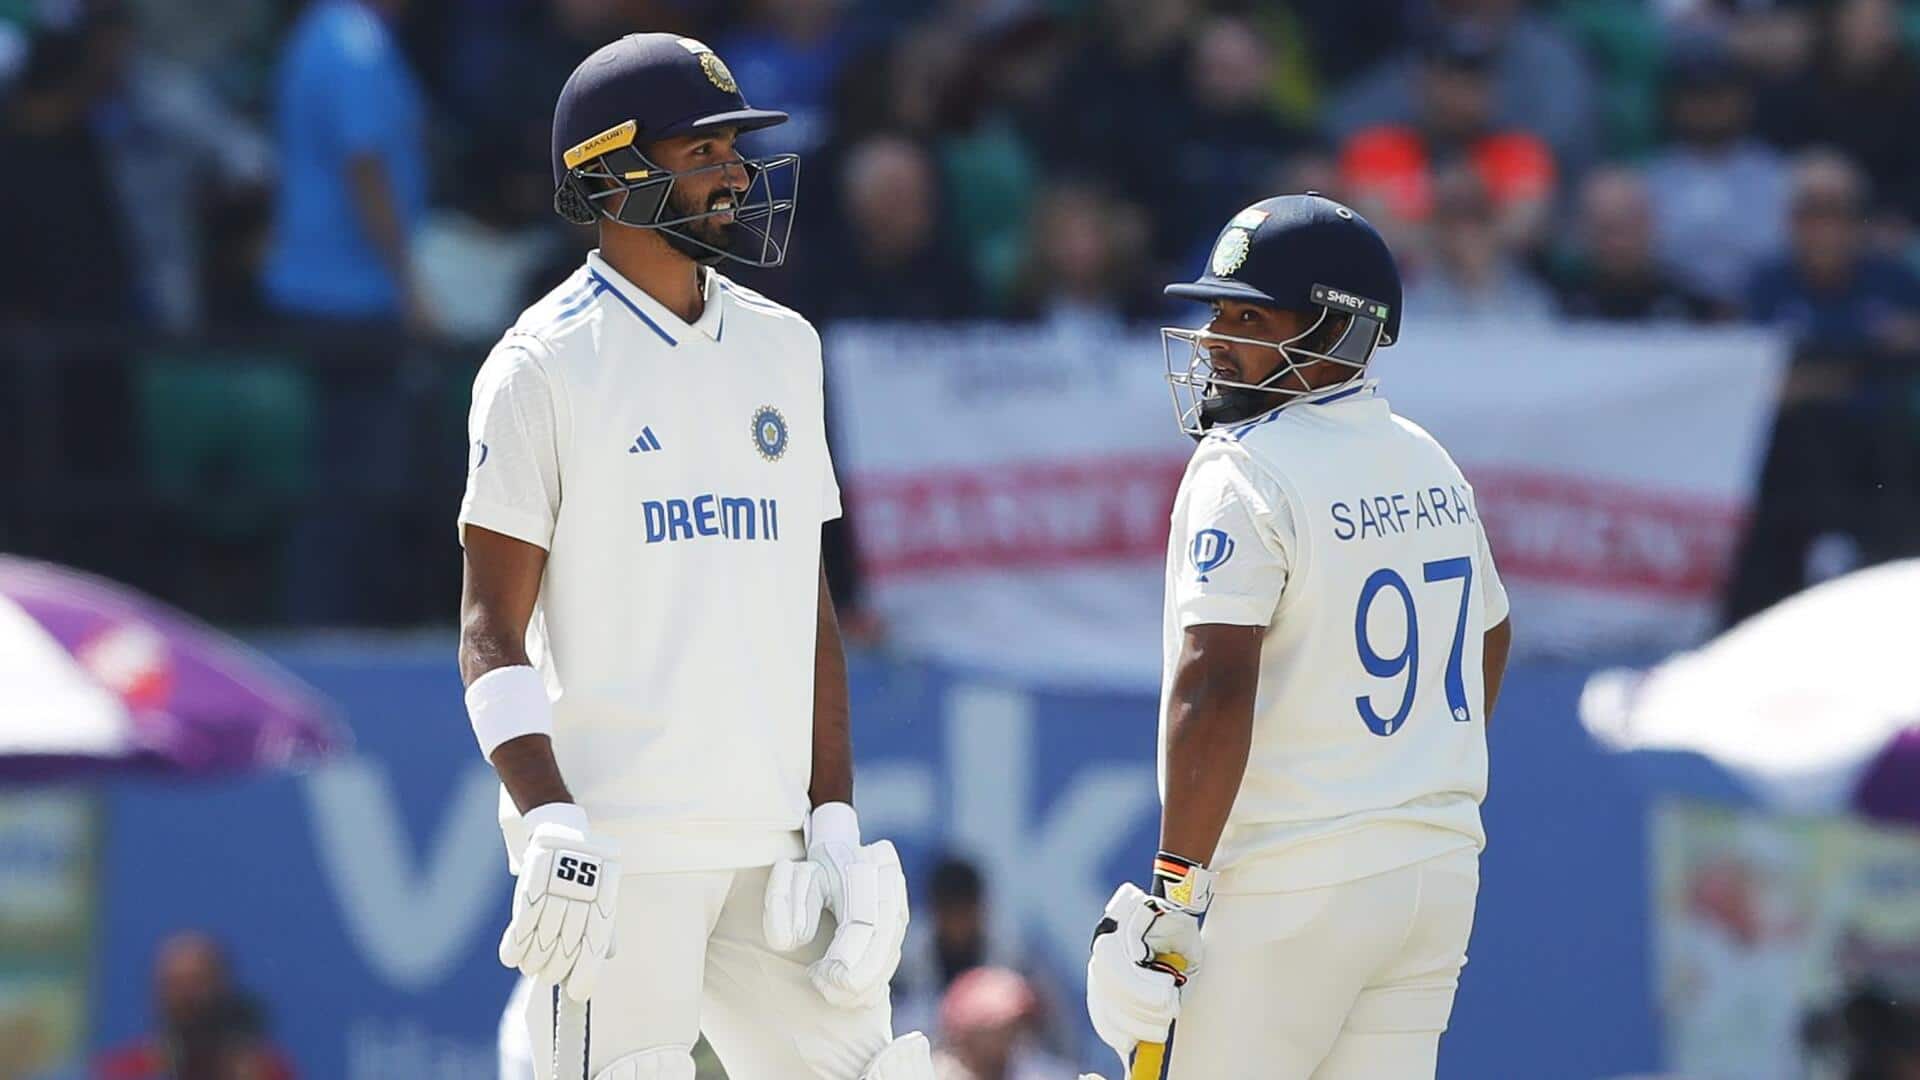 Dharamsala Test, Day 2: India lead England by 255 runs